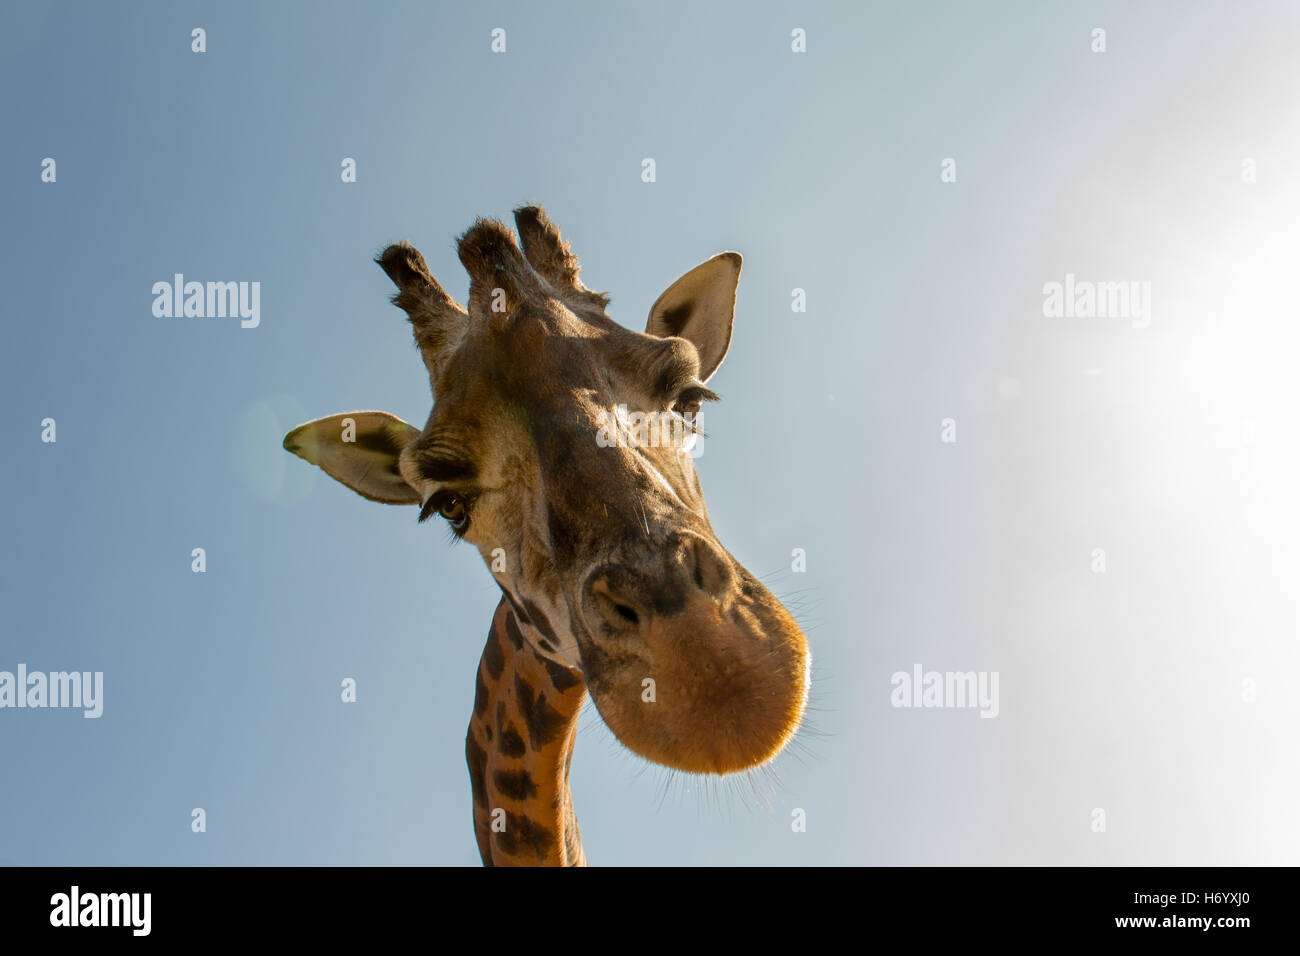 Giraffe head, surprise stares at me on a sunny day. Stock Photo